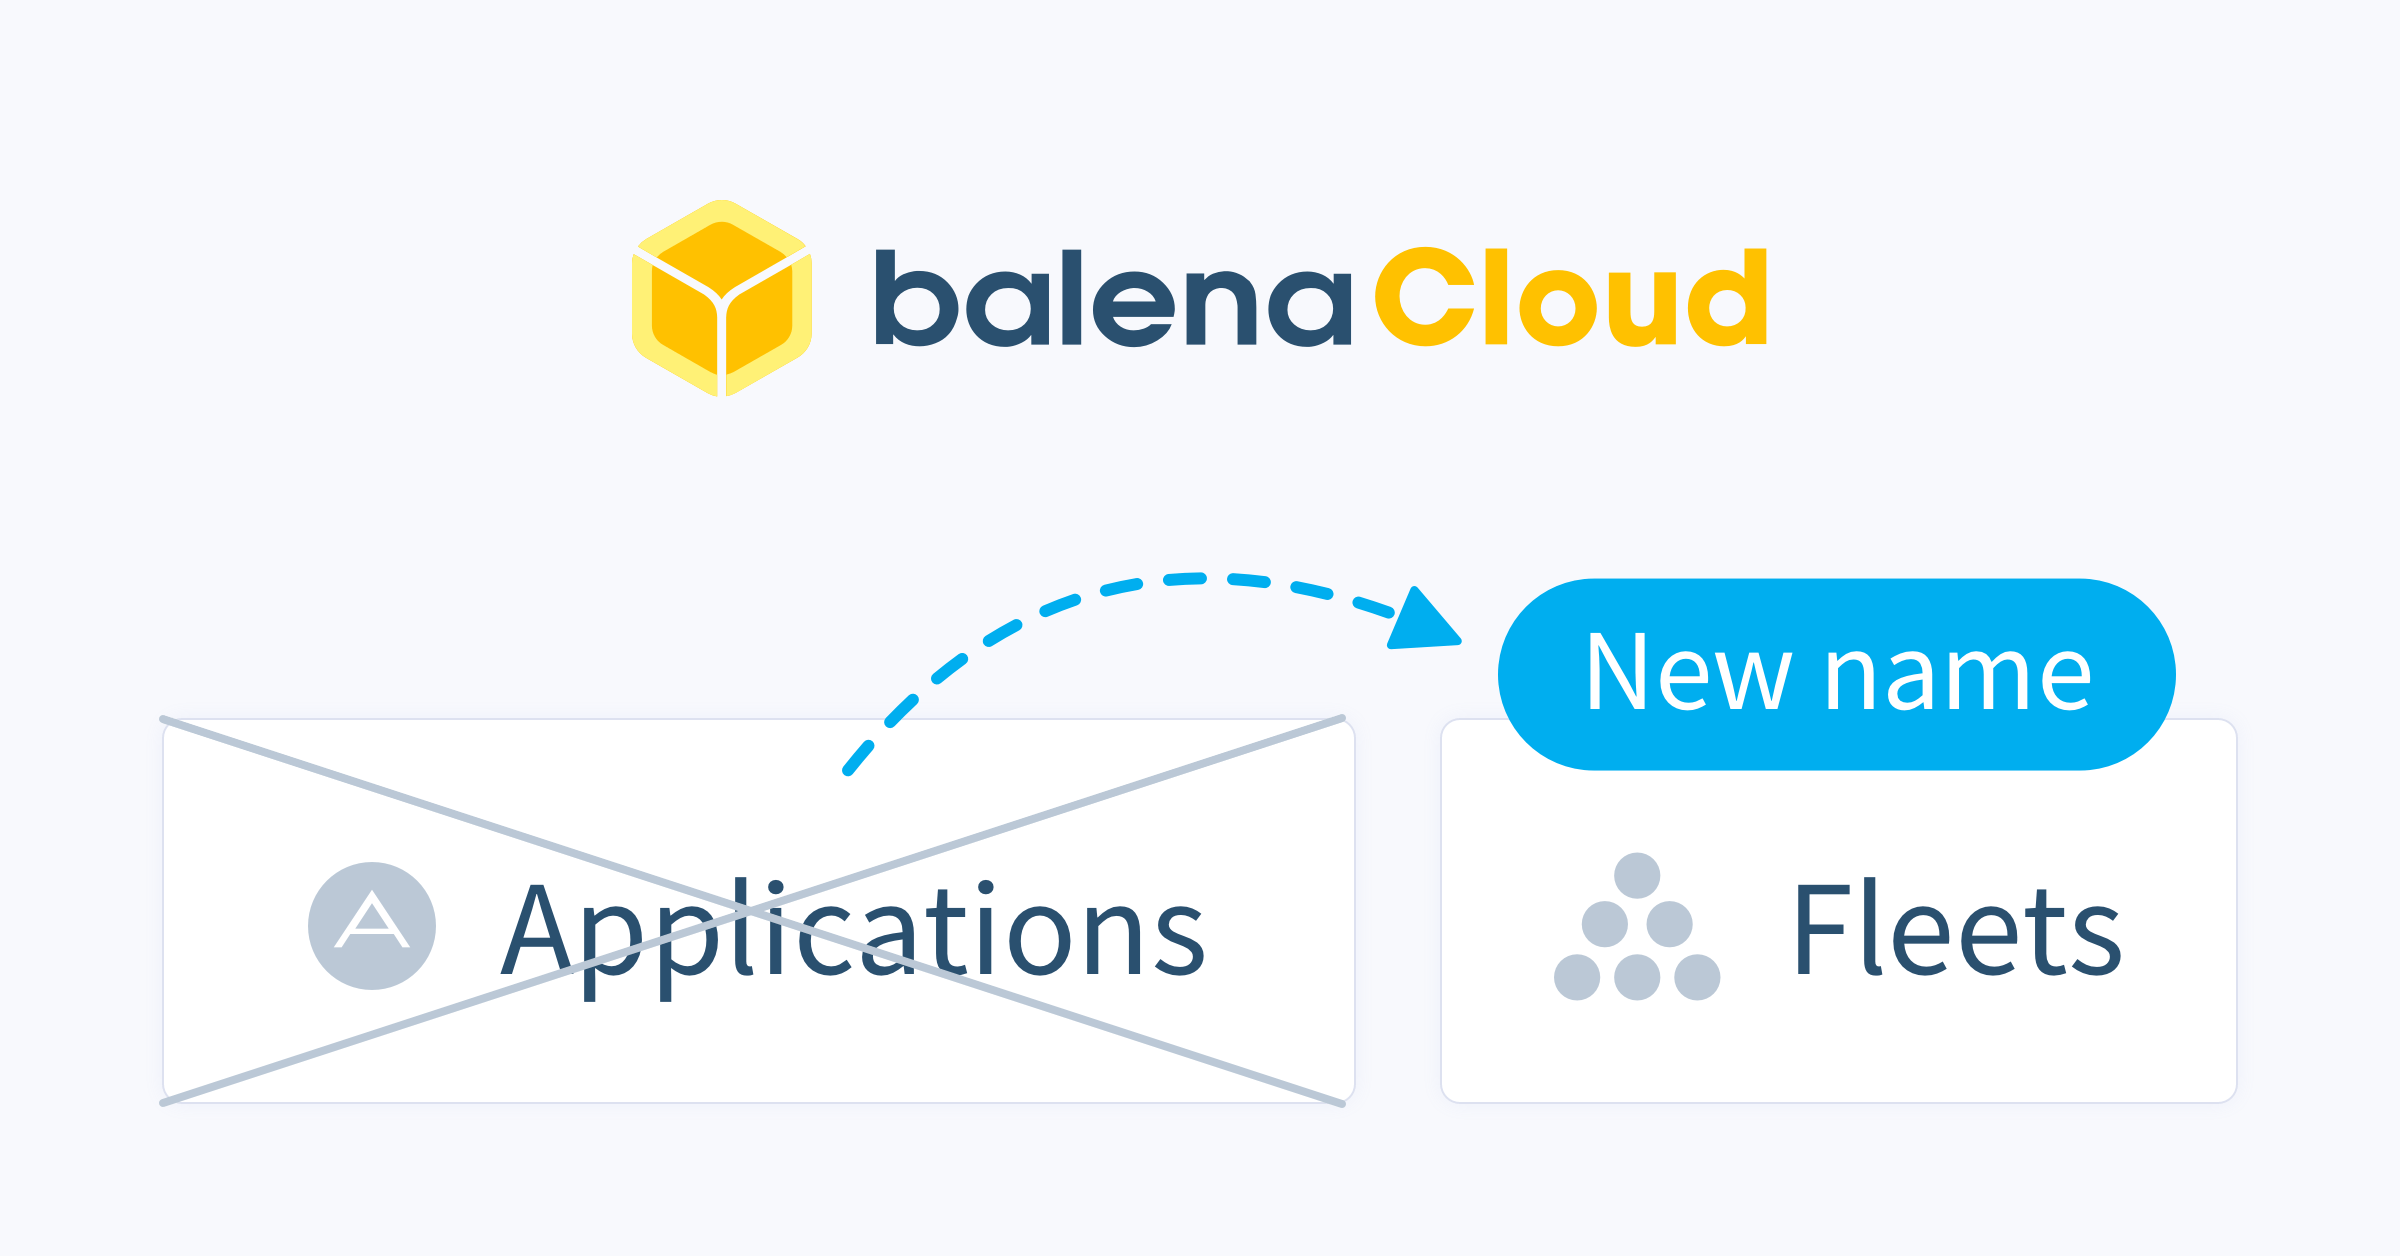 The road to multi-app: transitioning balenaCloud Applications to Fleets